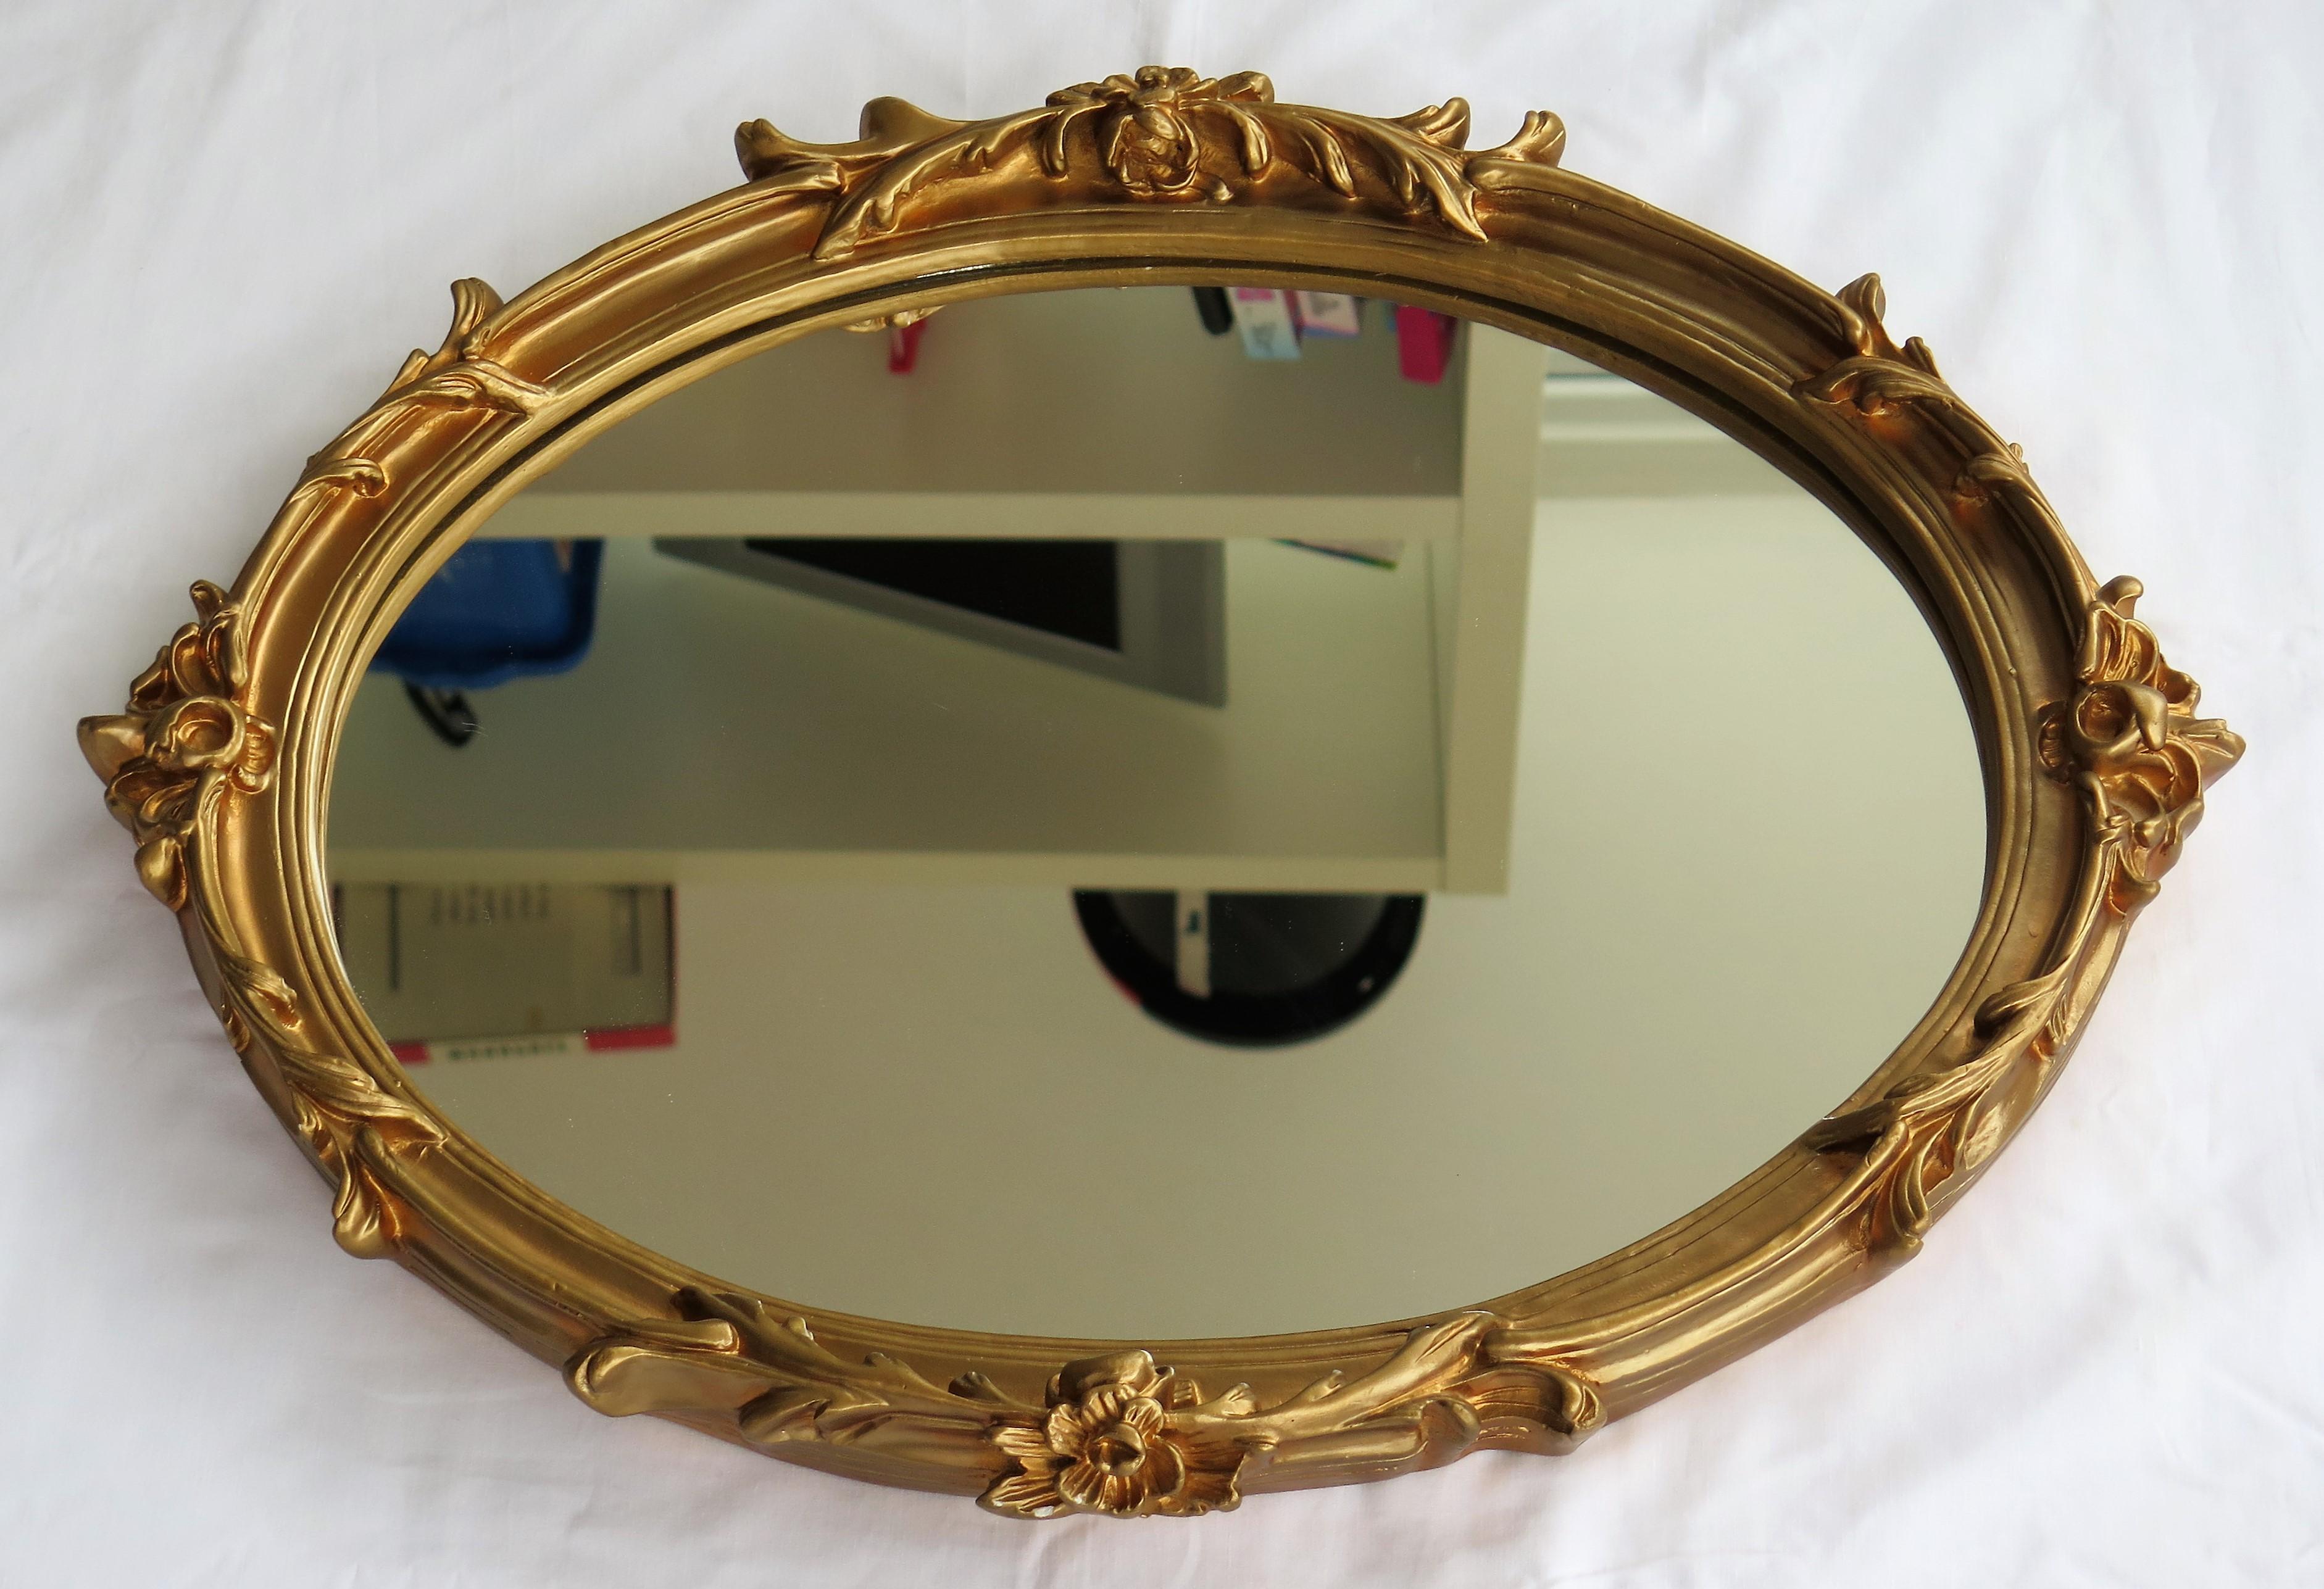 Rococo Revival Oval Wall Mirror with Rococo Gold Finish Frame of Gesso on Wood, circa 1930